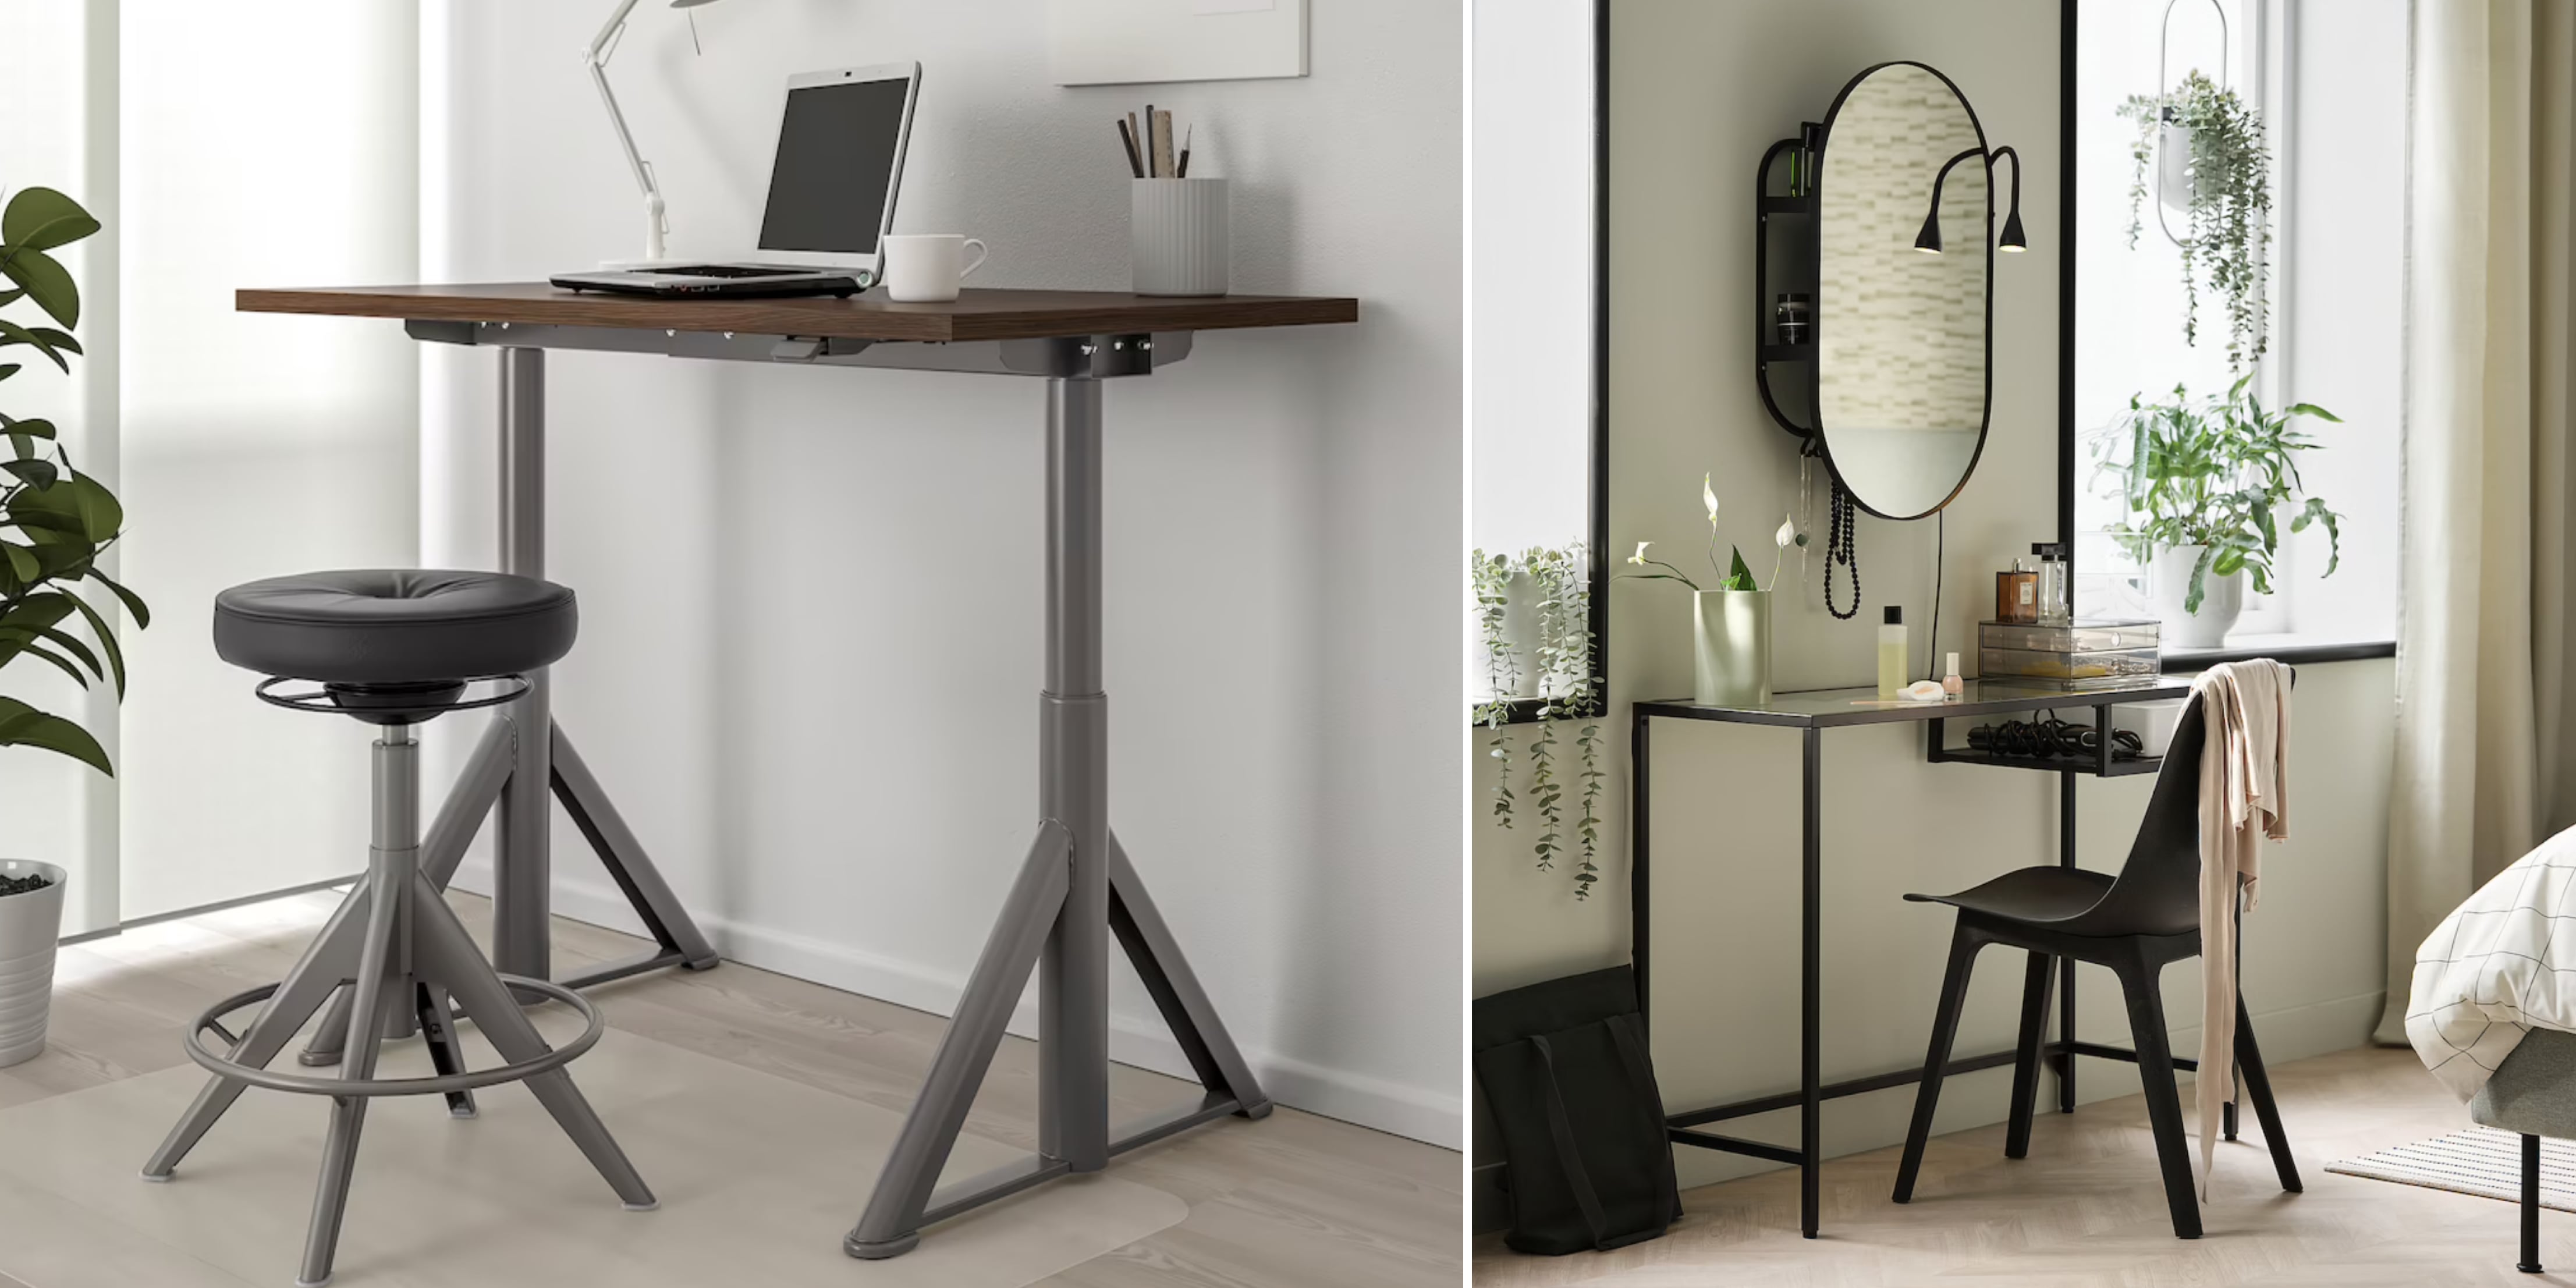 How to Convert an IKEA Desk to a Standing Desk (It's Actually Easy)